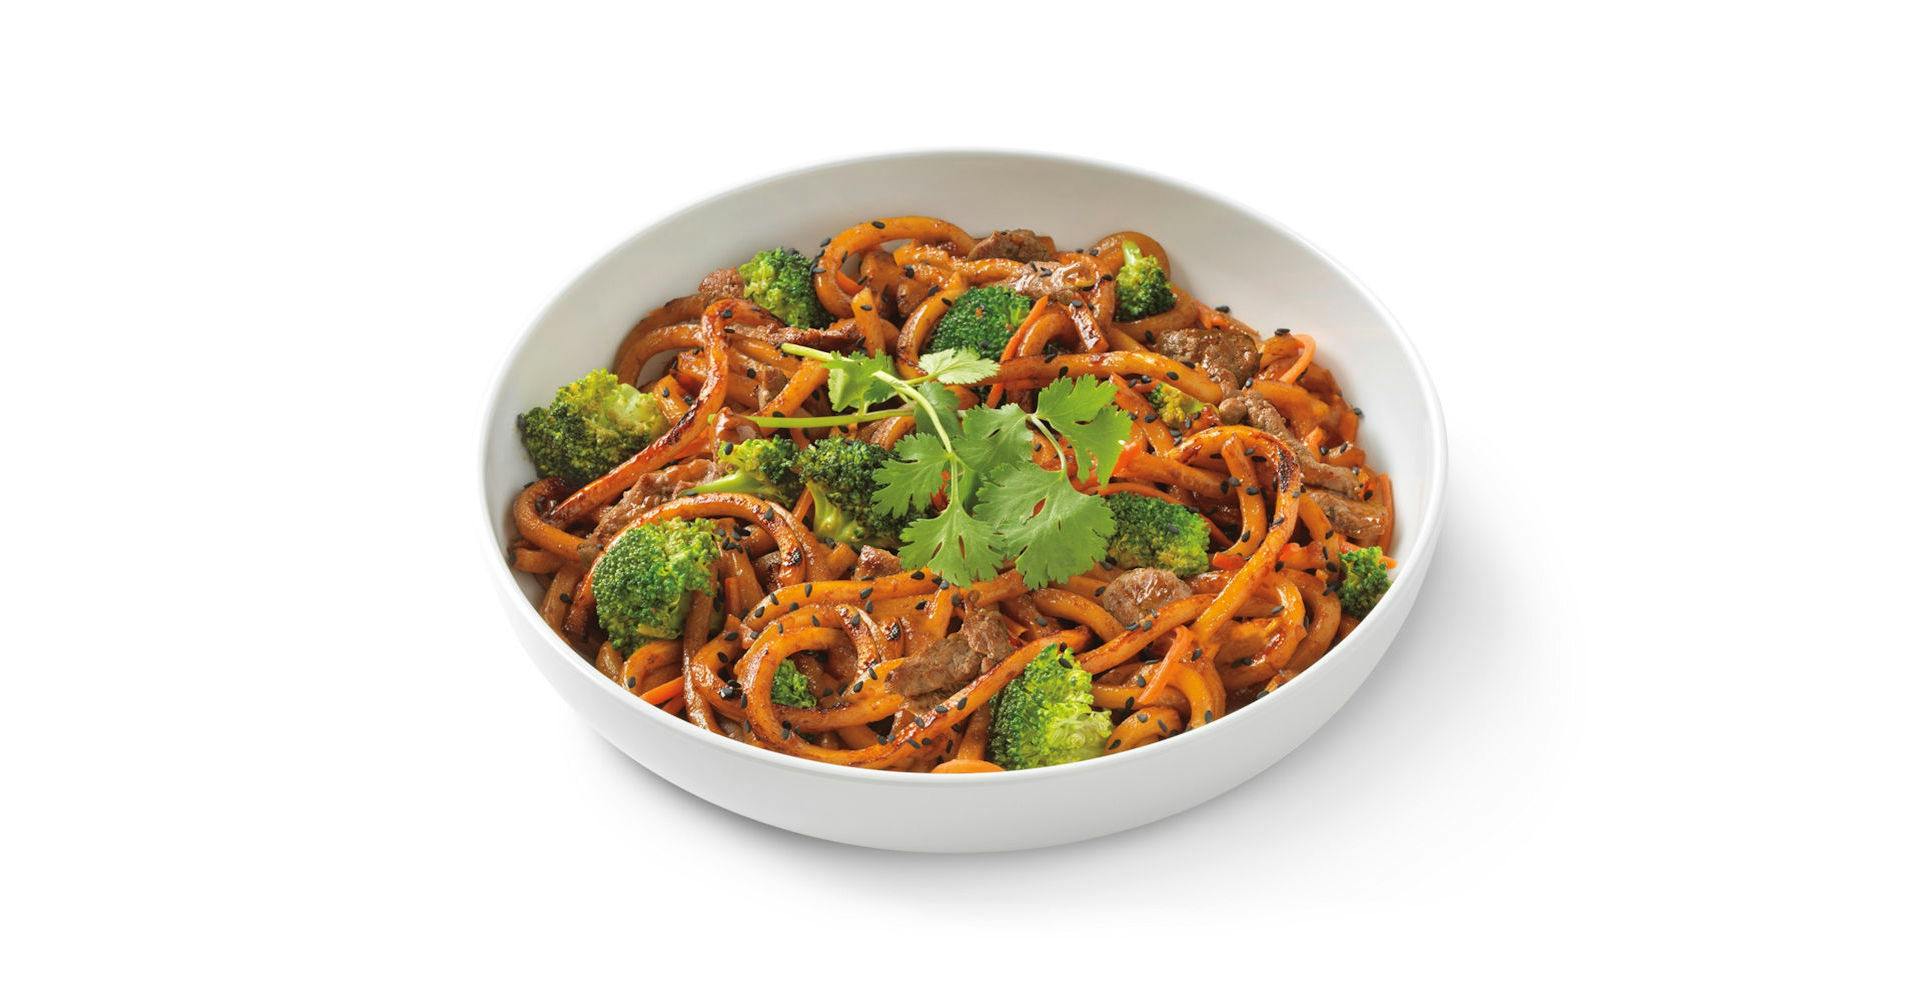 Japanese Pan Noodles with Marinated Steak from Noodles & Company - Appleton E Calumet in Appleton, WI